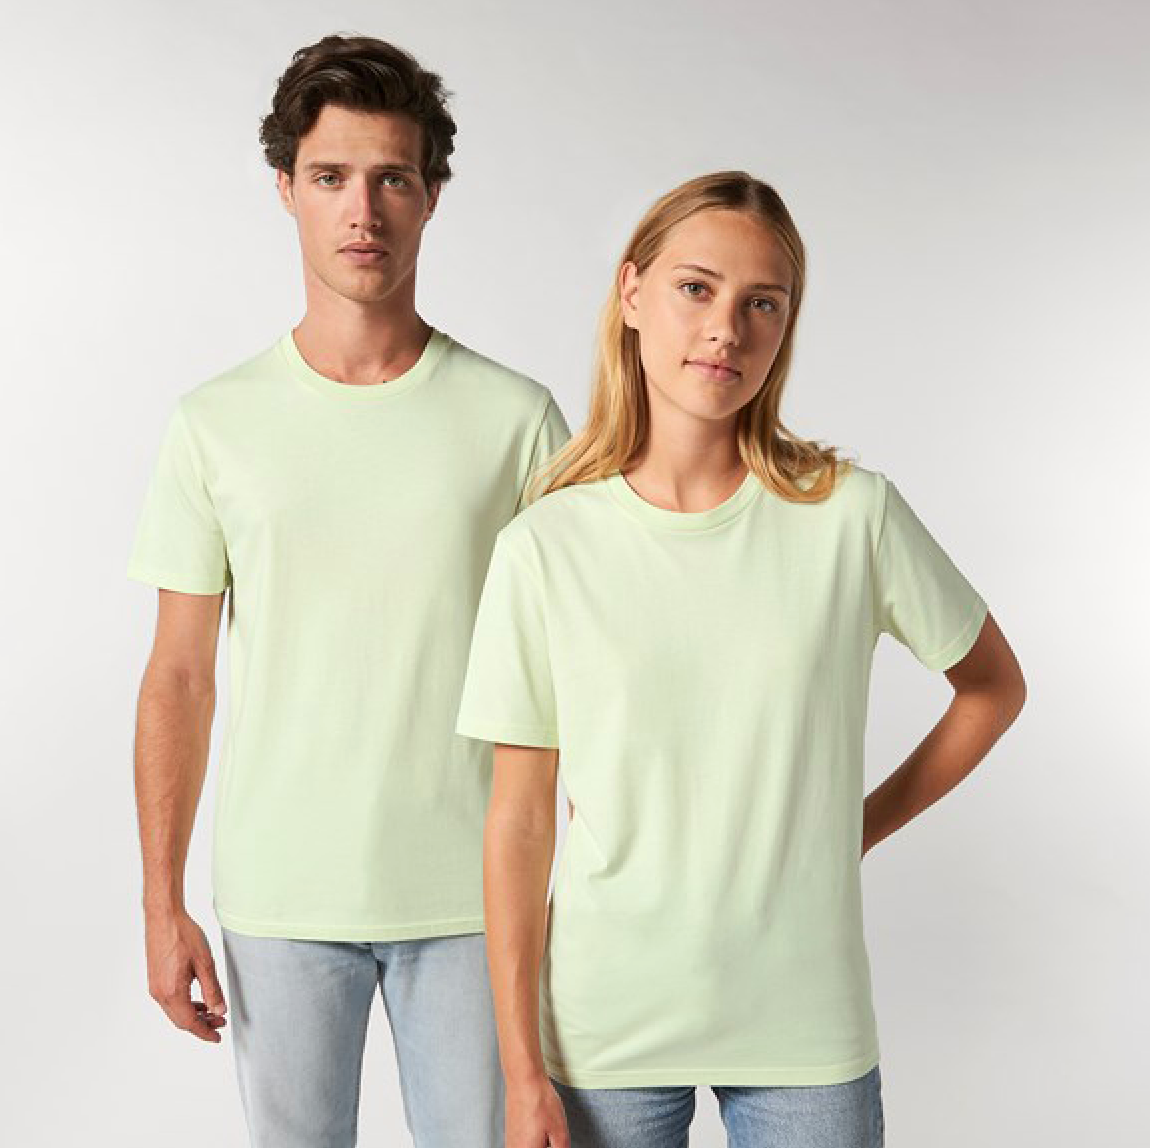 STANLEY AND STELLA, UNISEX CREATOR ICONIC T-SHIRT